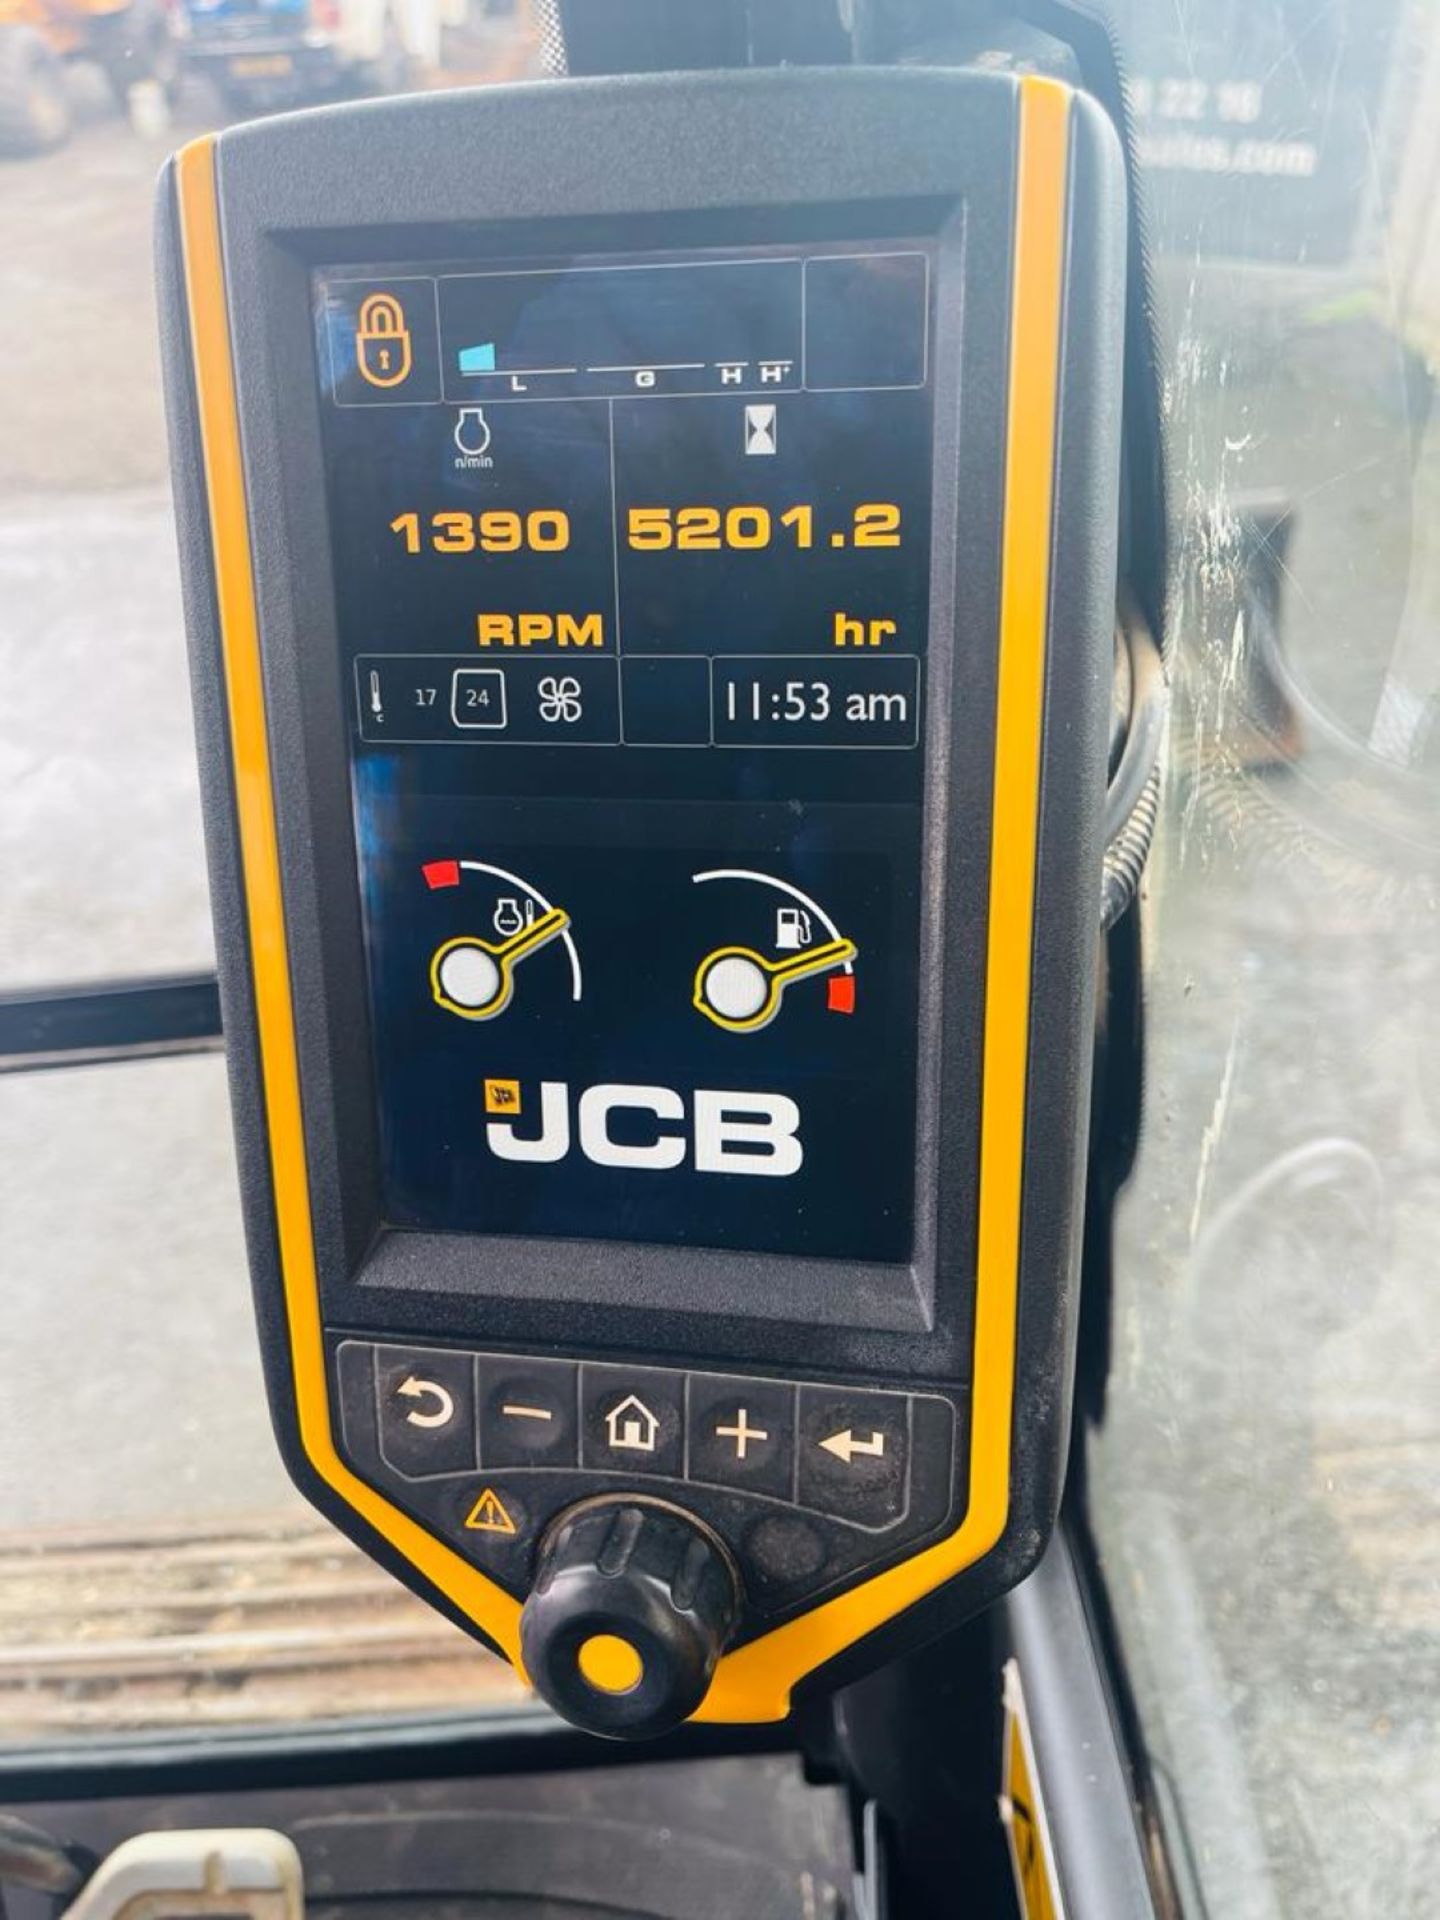 JCB JS131 LC PLUS 2017 5201 HOURS CODED START AIR CON BOXING RING - Image 8 of 17